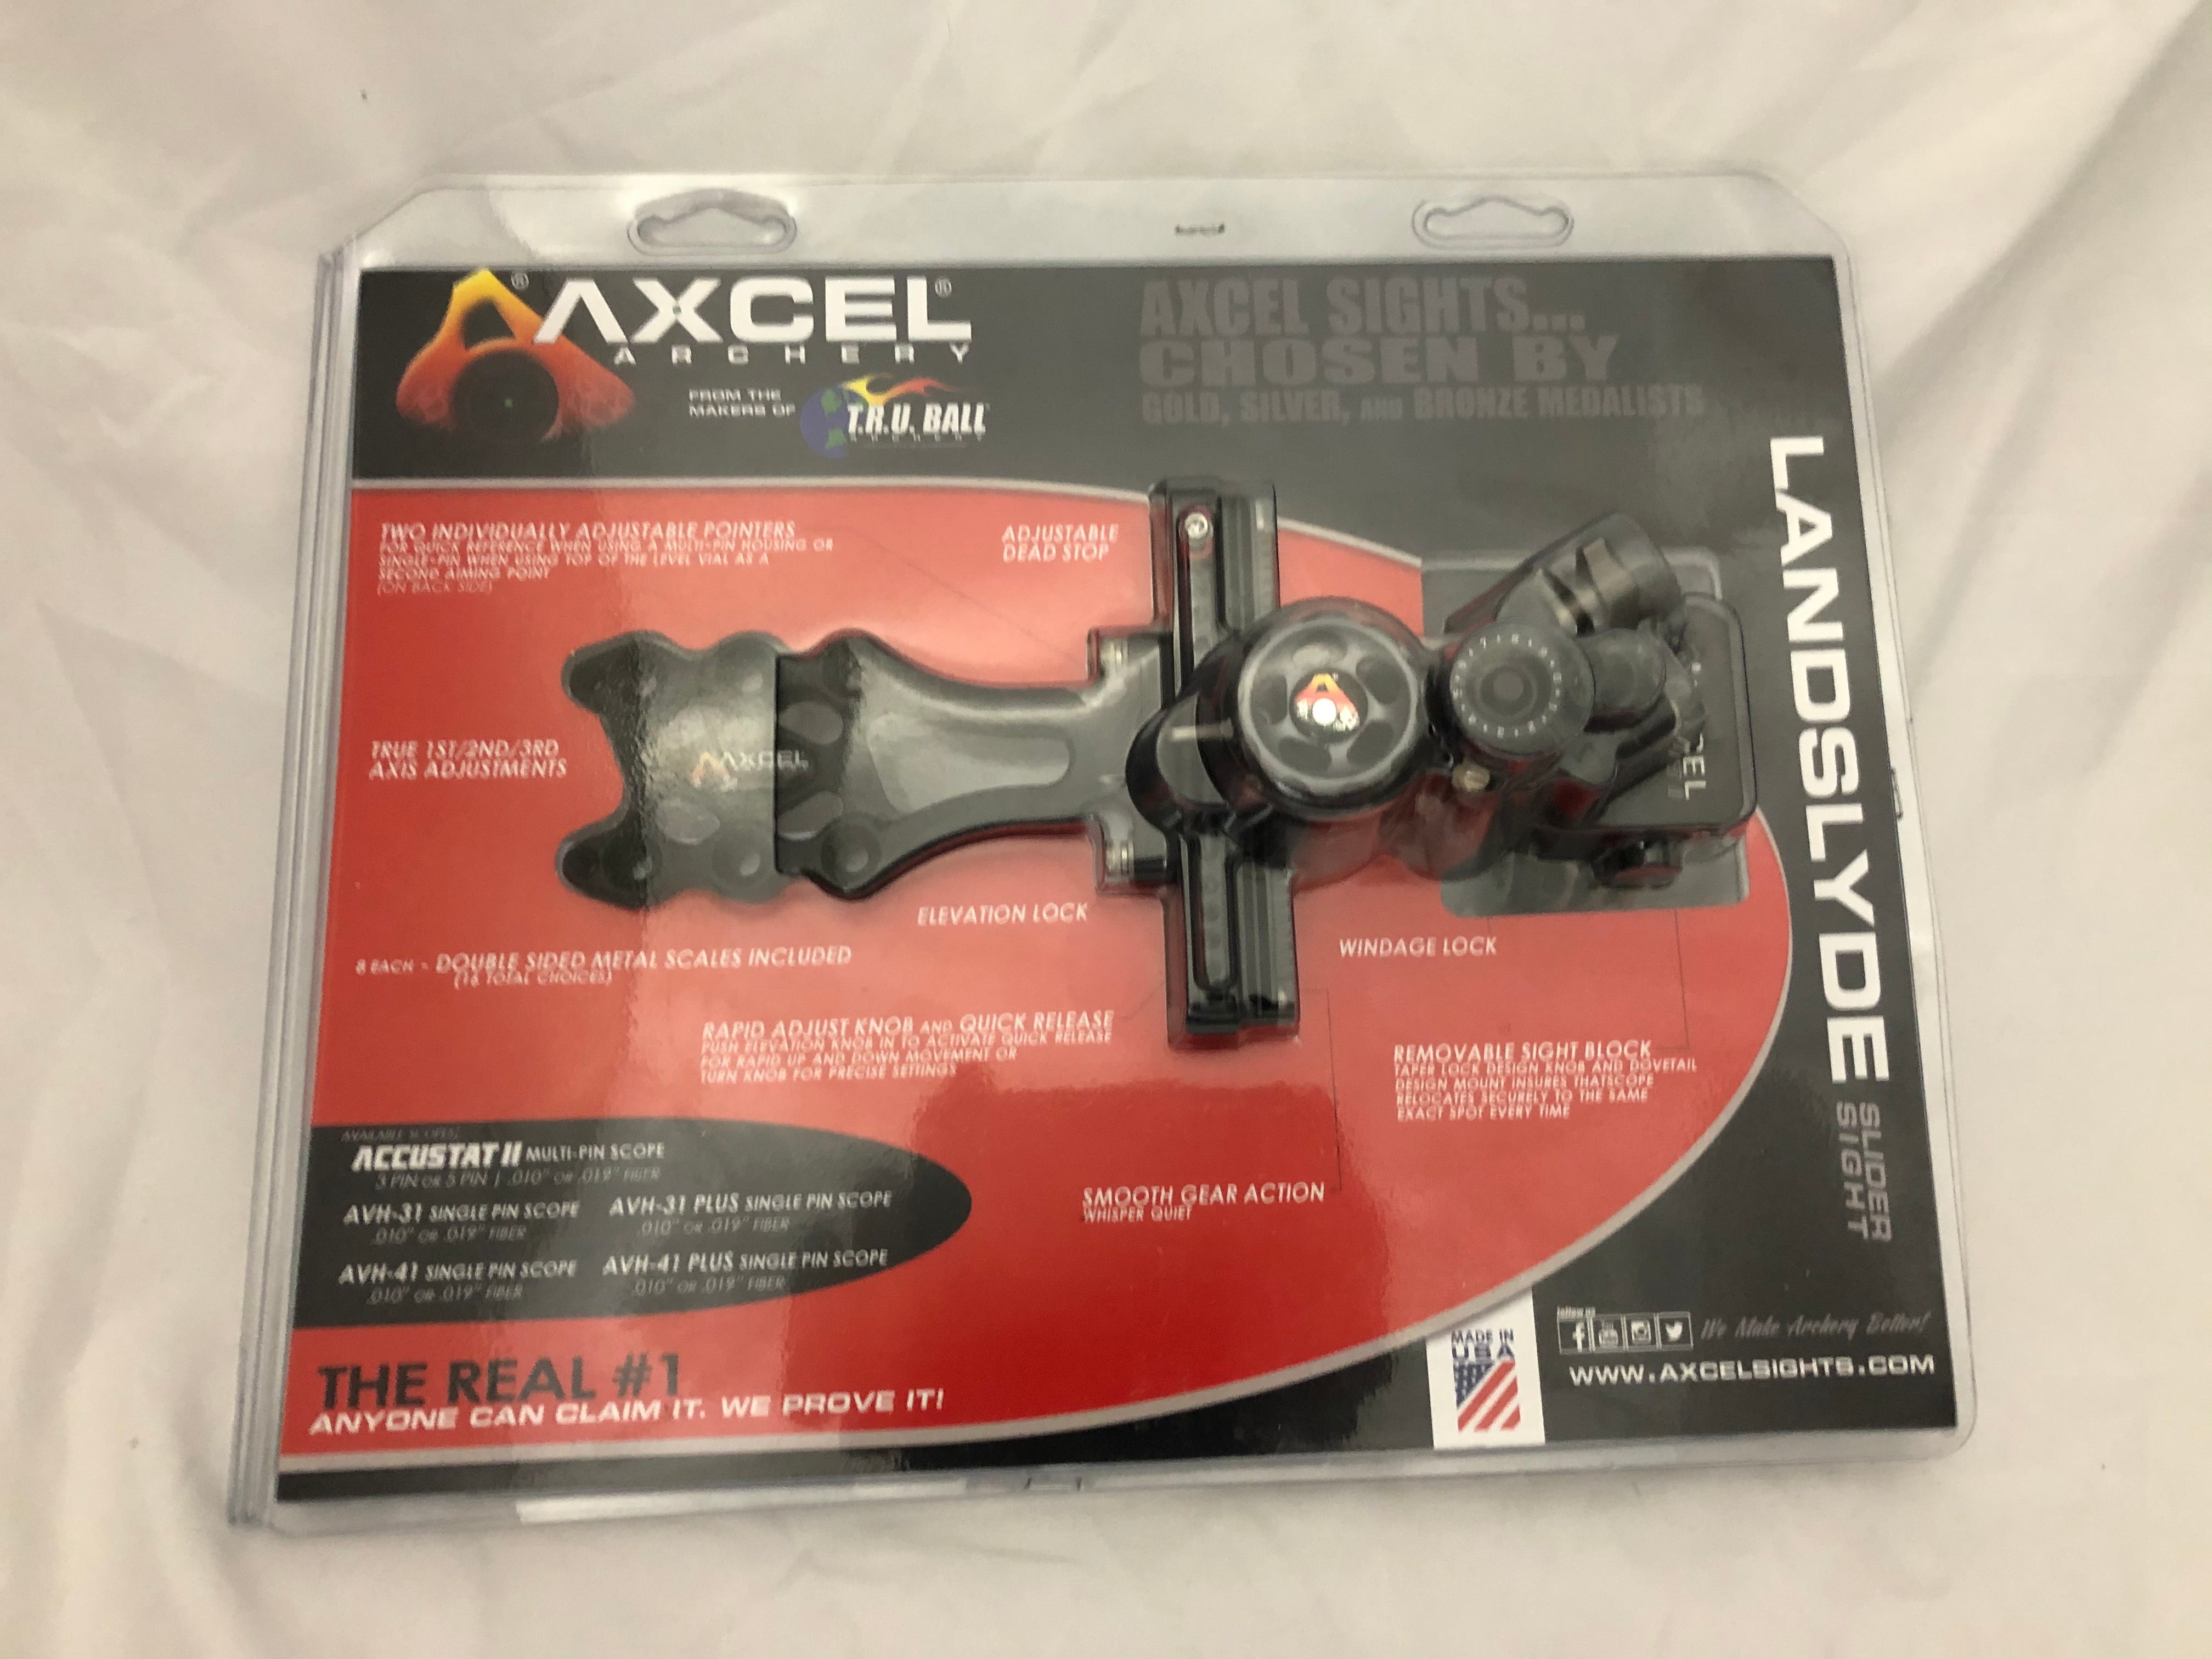 Axcel LANDSLYDE ACCUSTAT II 5 Pin .019 and .010" Right-Hand Direct Mount